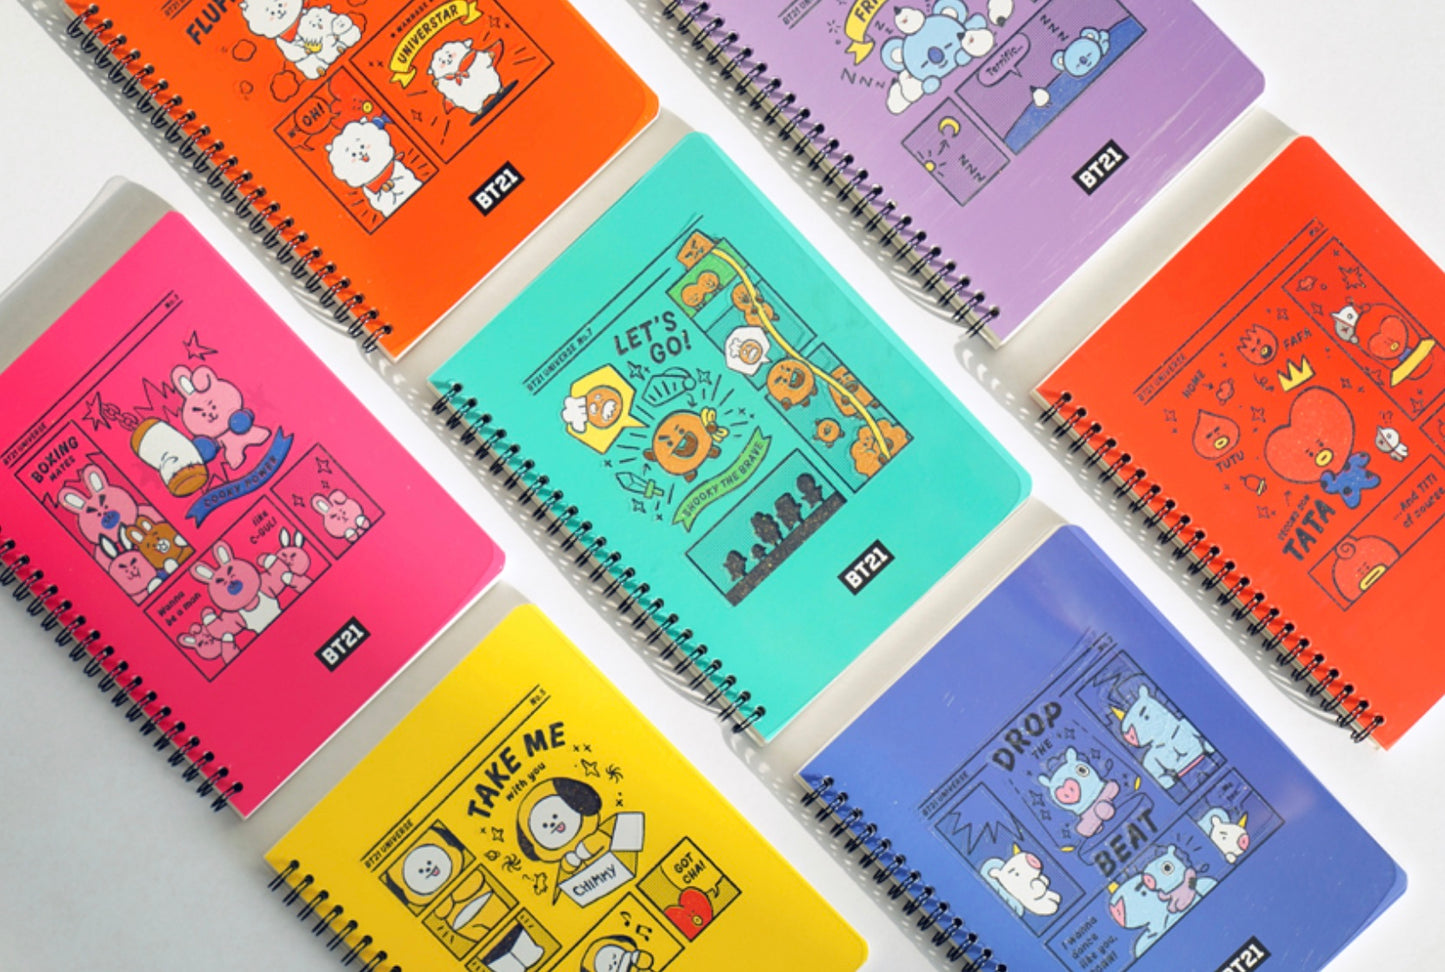 BT21 Epoxy PP Cover Notebook